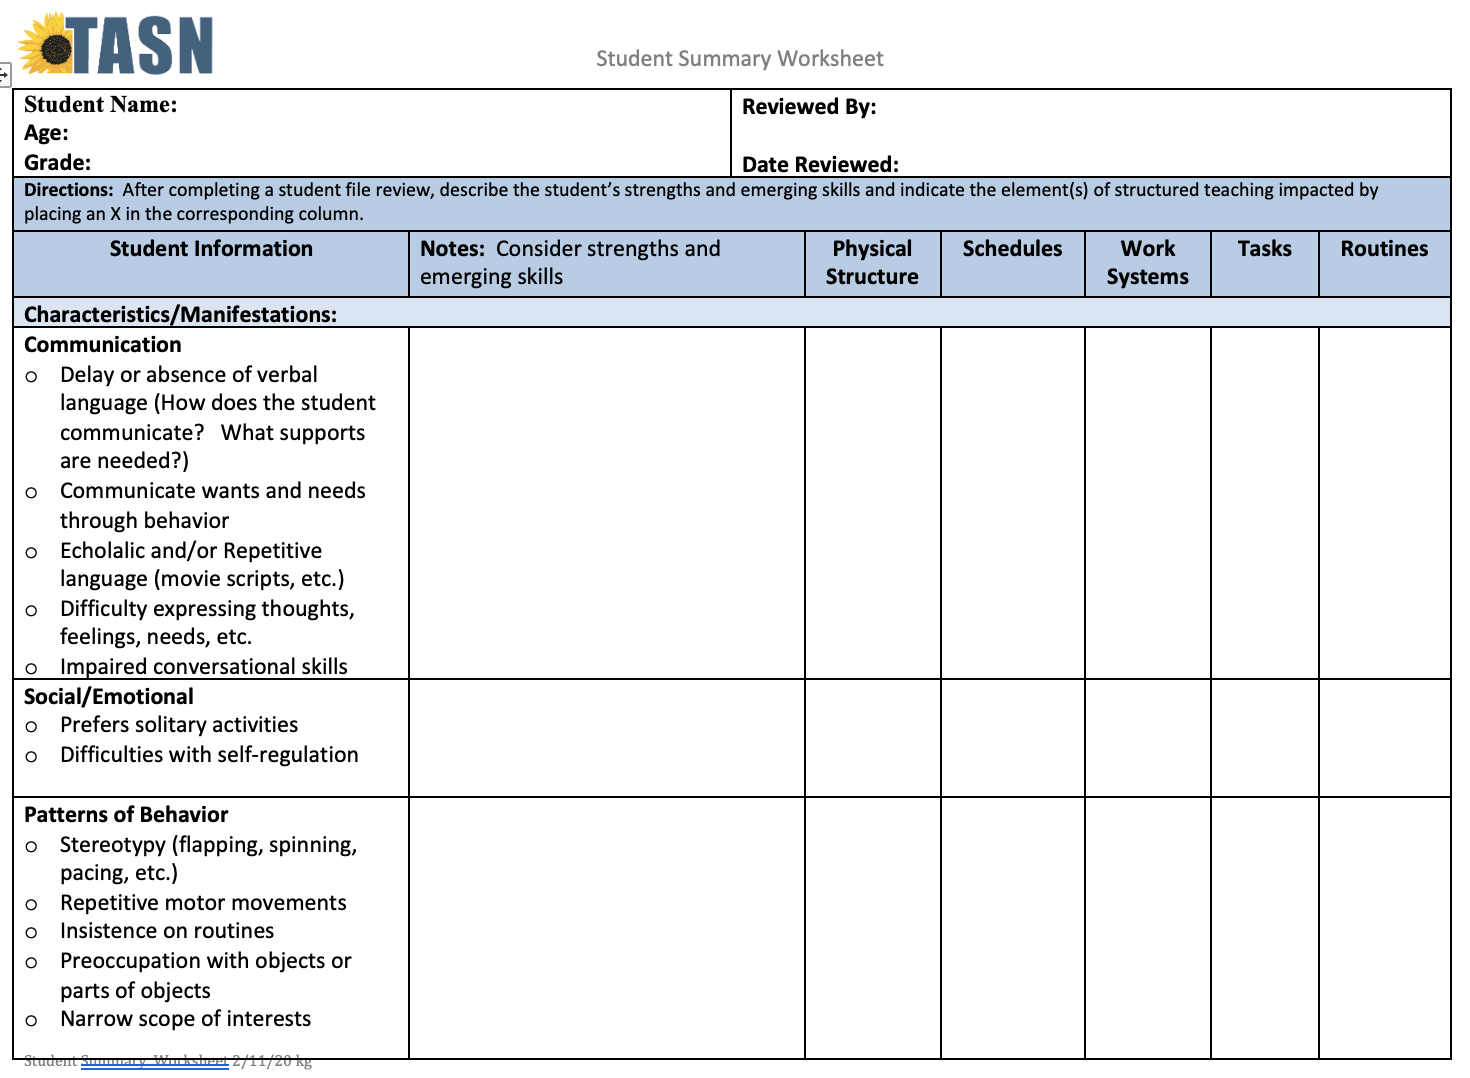 Image of the first page of the Student Summary Worksheet